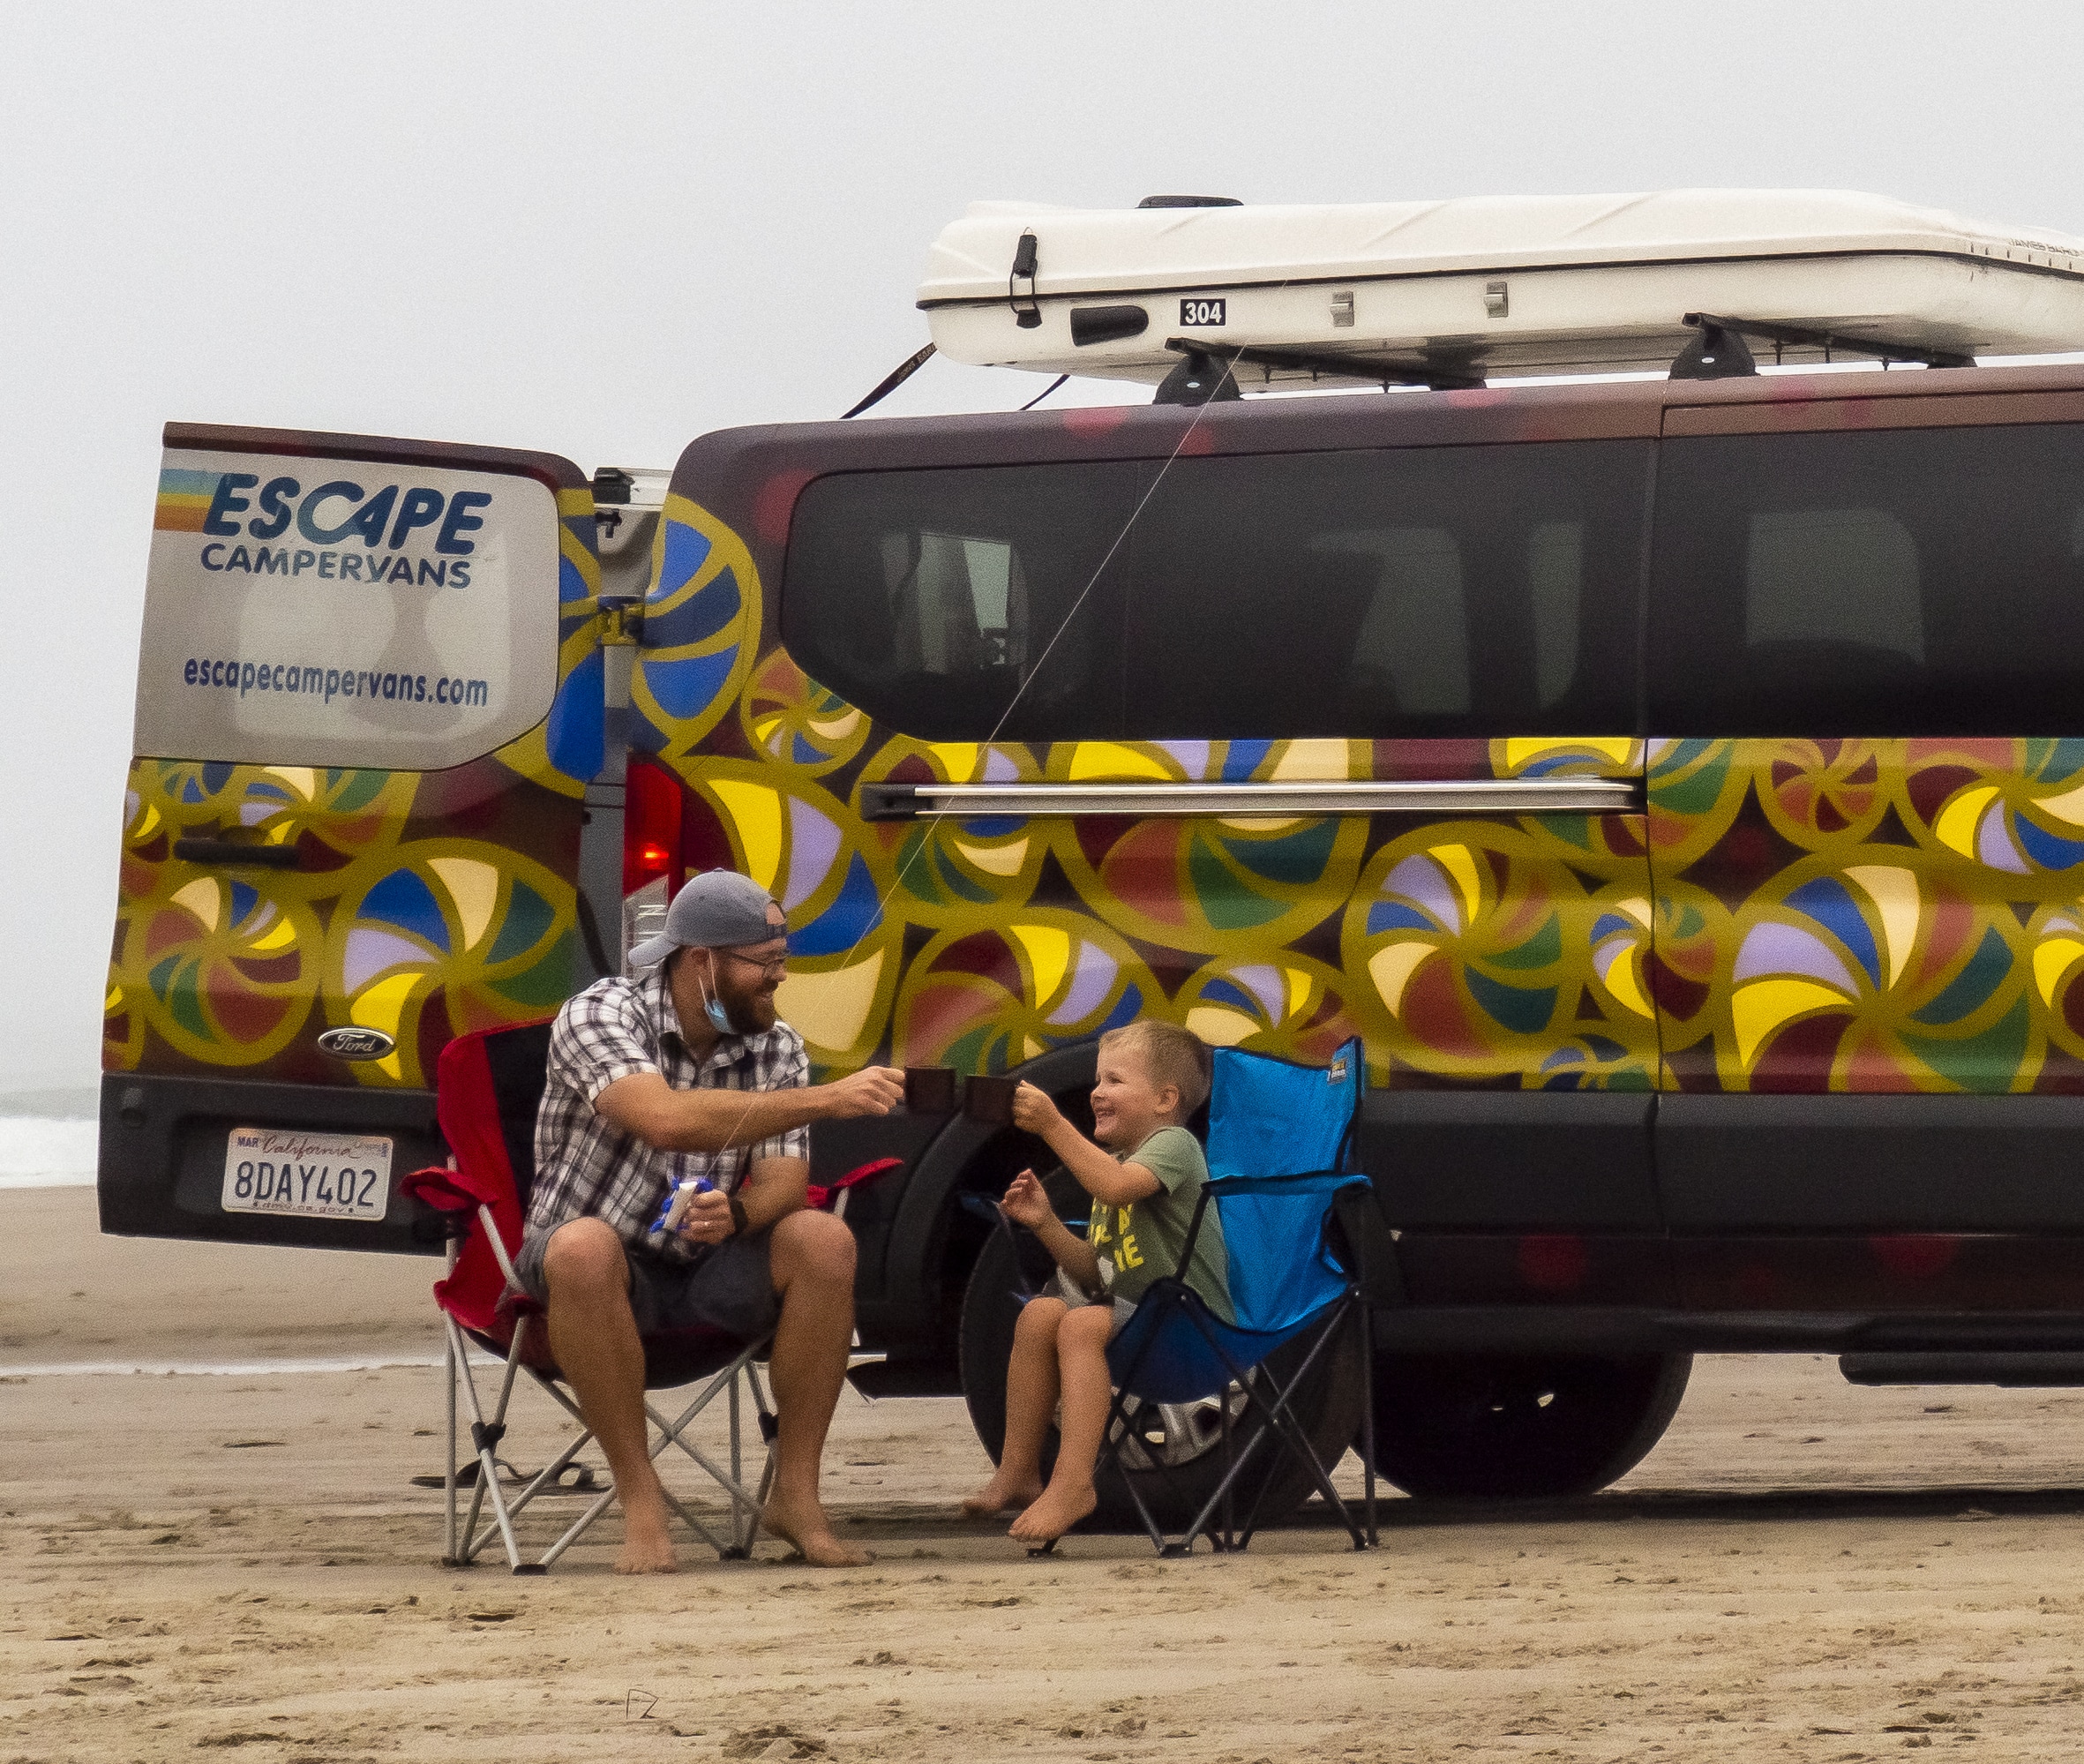 Father and son sitting next to an Escape Campervan